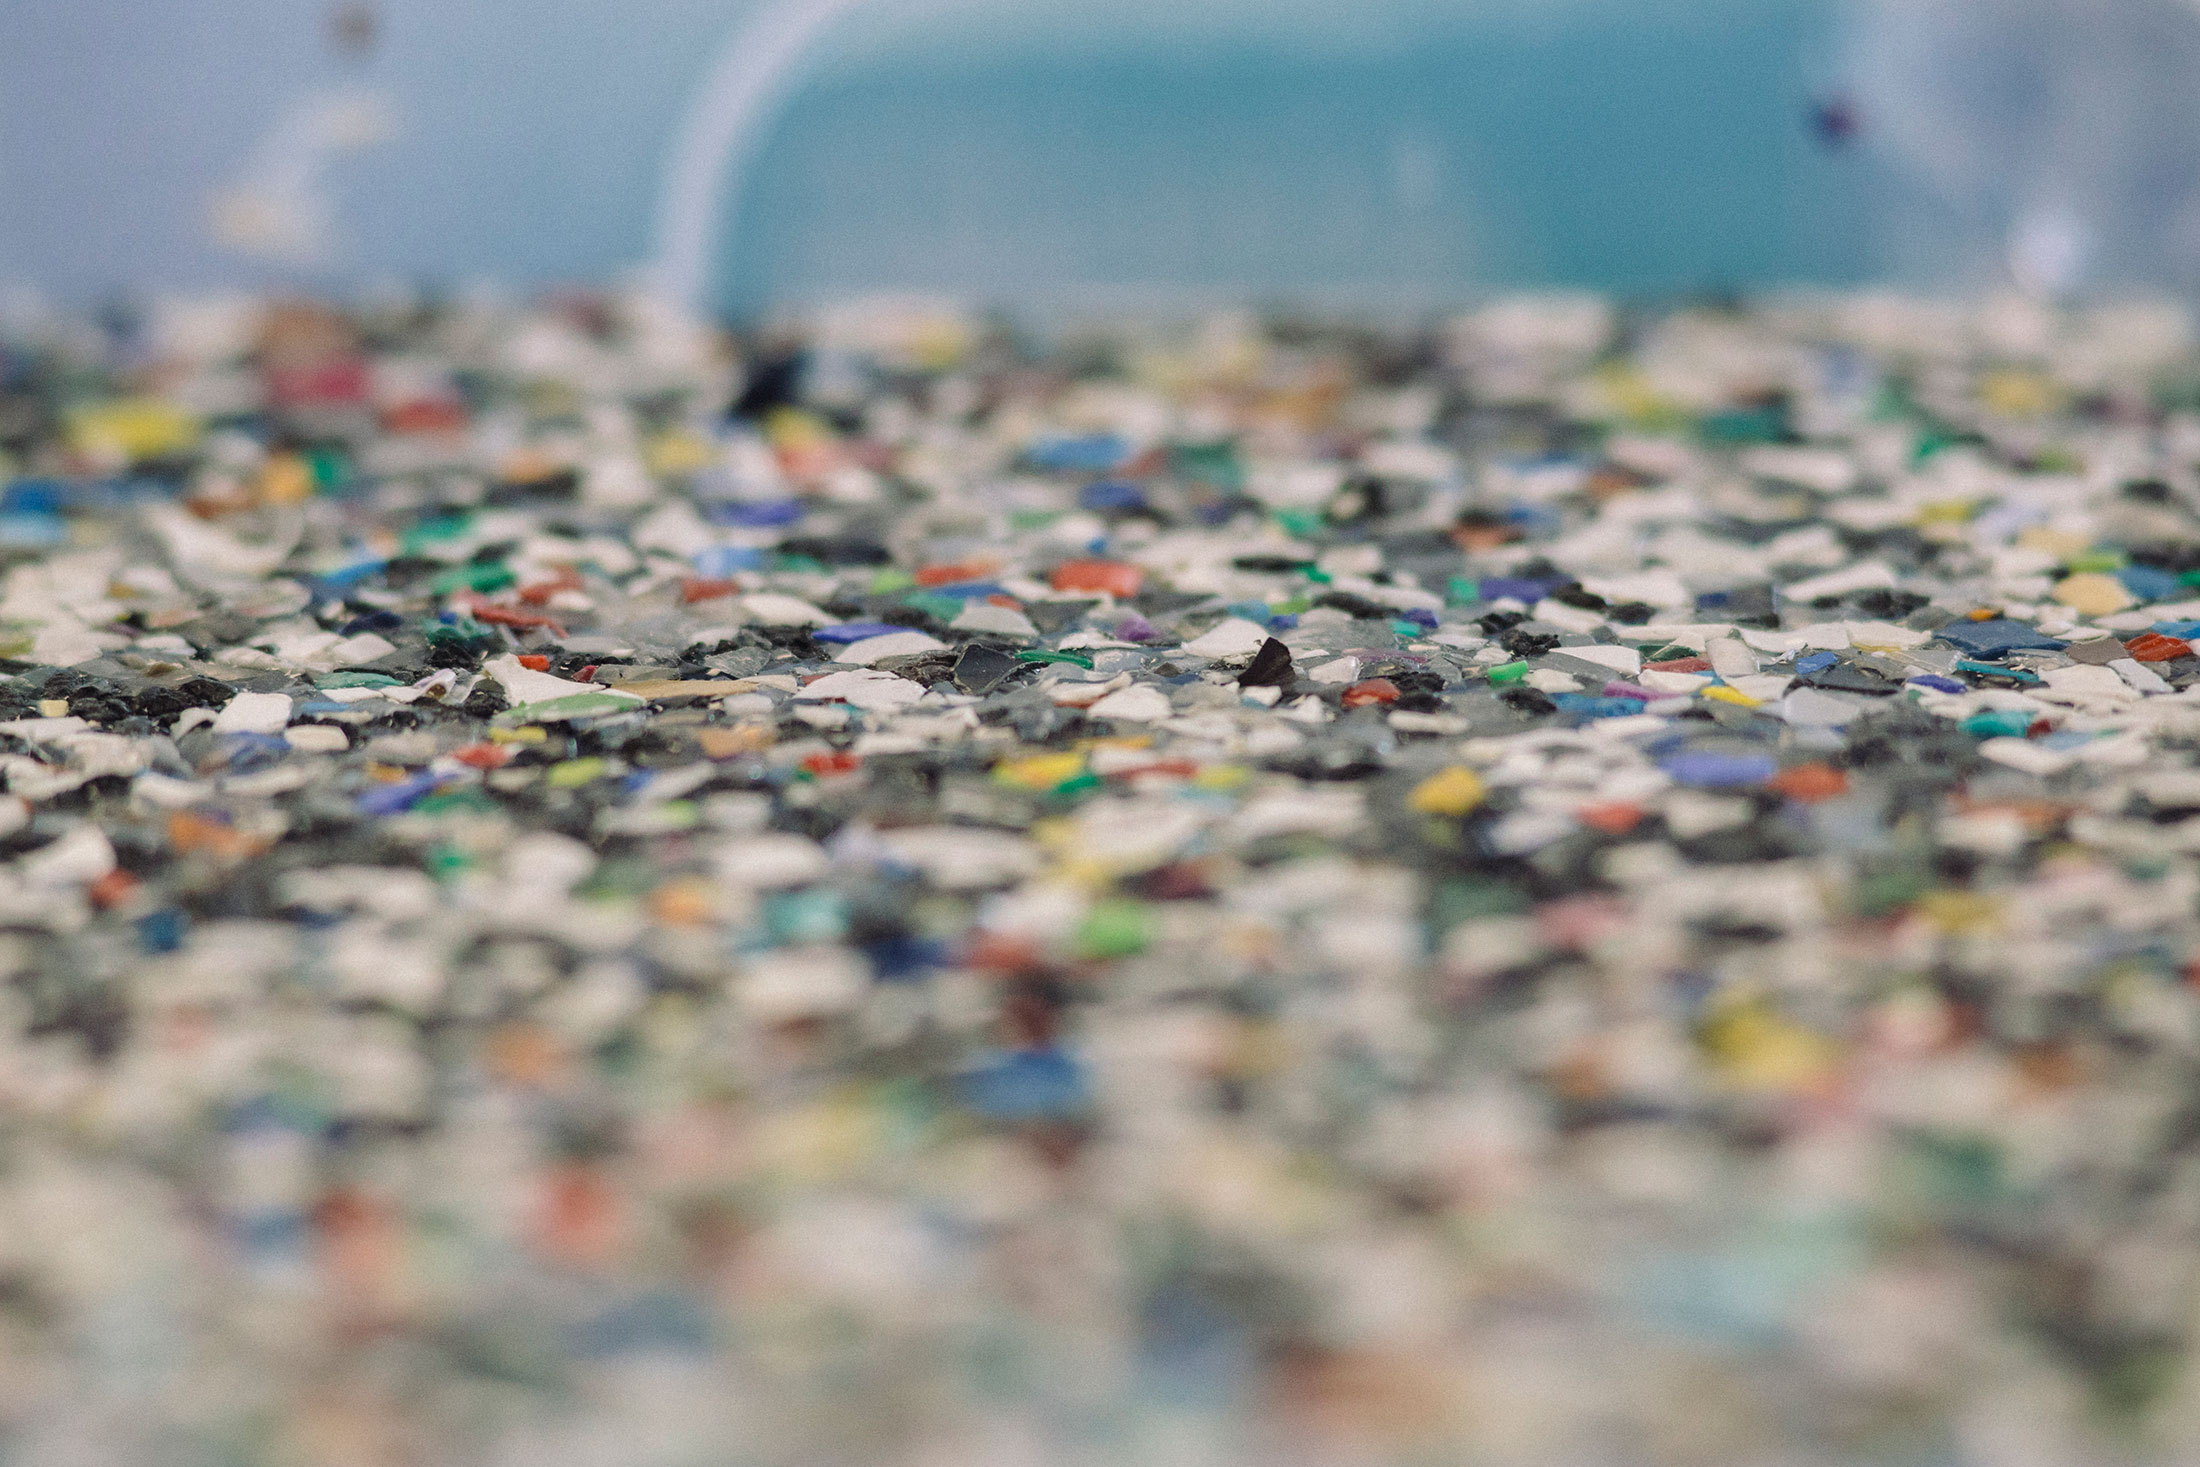 P&amp;G found a way to take scrap polypropylene and turn&nbsp;it into virgin-like plastic that can be recycled into new bottles.